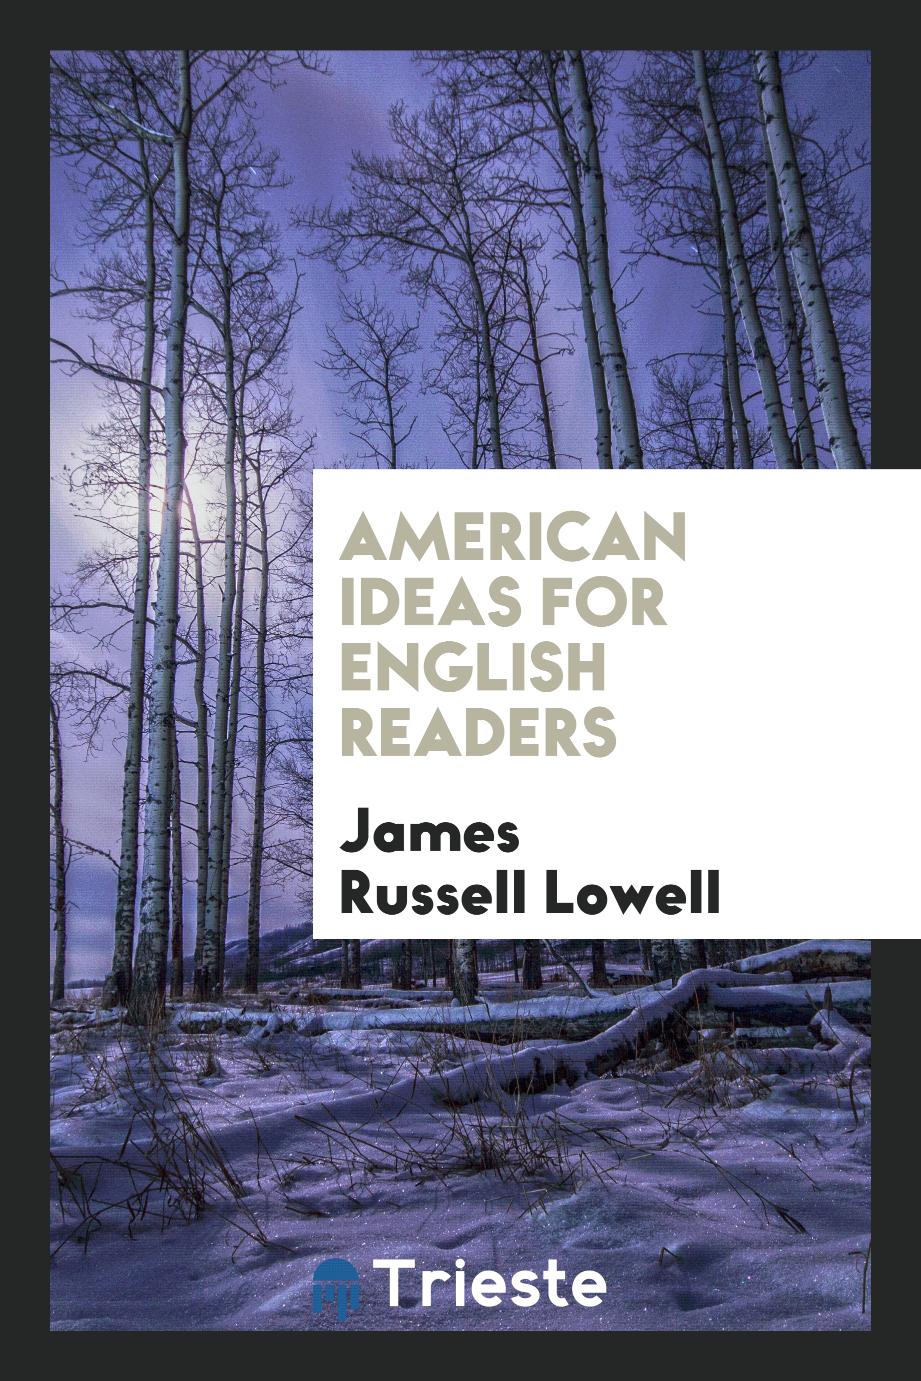 American Ideas for English Readers